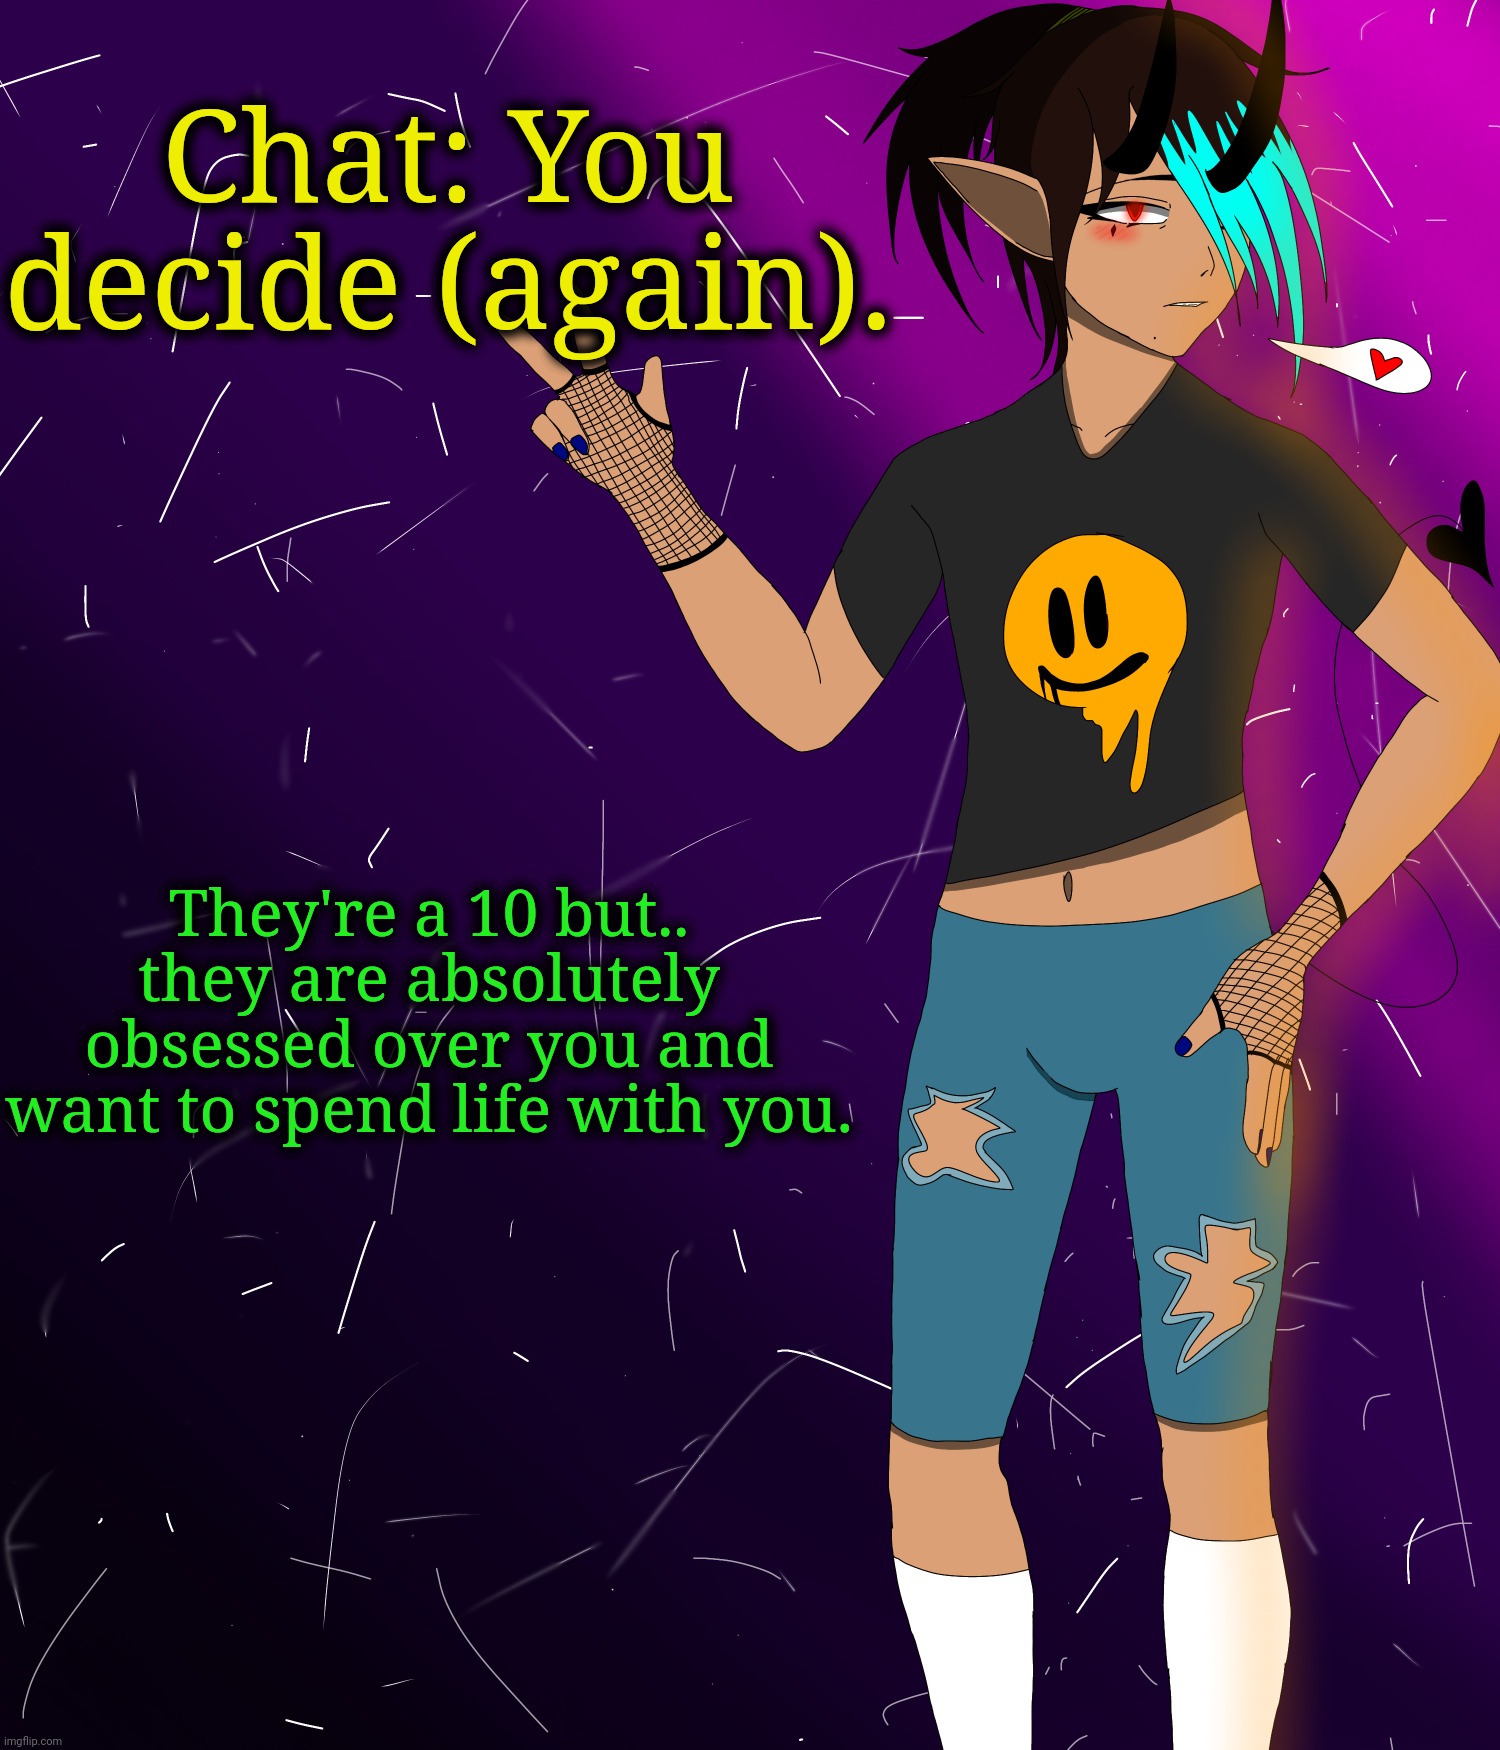 Spire jus chillin I guess | Chat: You decide (again). They're a 10 but.. they are absolutely obsessed over you and want to spend life with you. | image tagged in spire jus chillin i guess | made w/ Imgflip meme maker